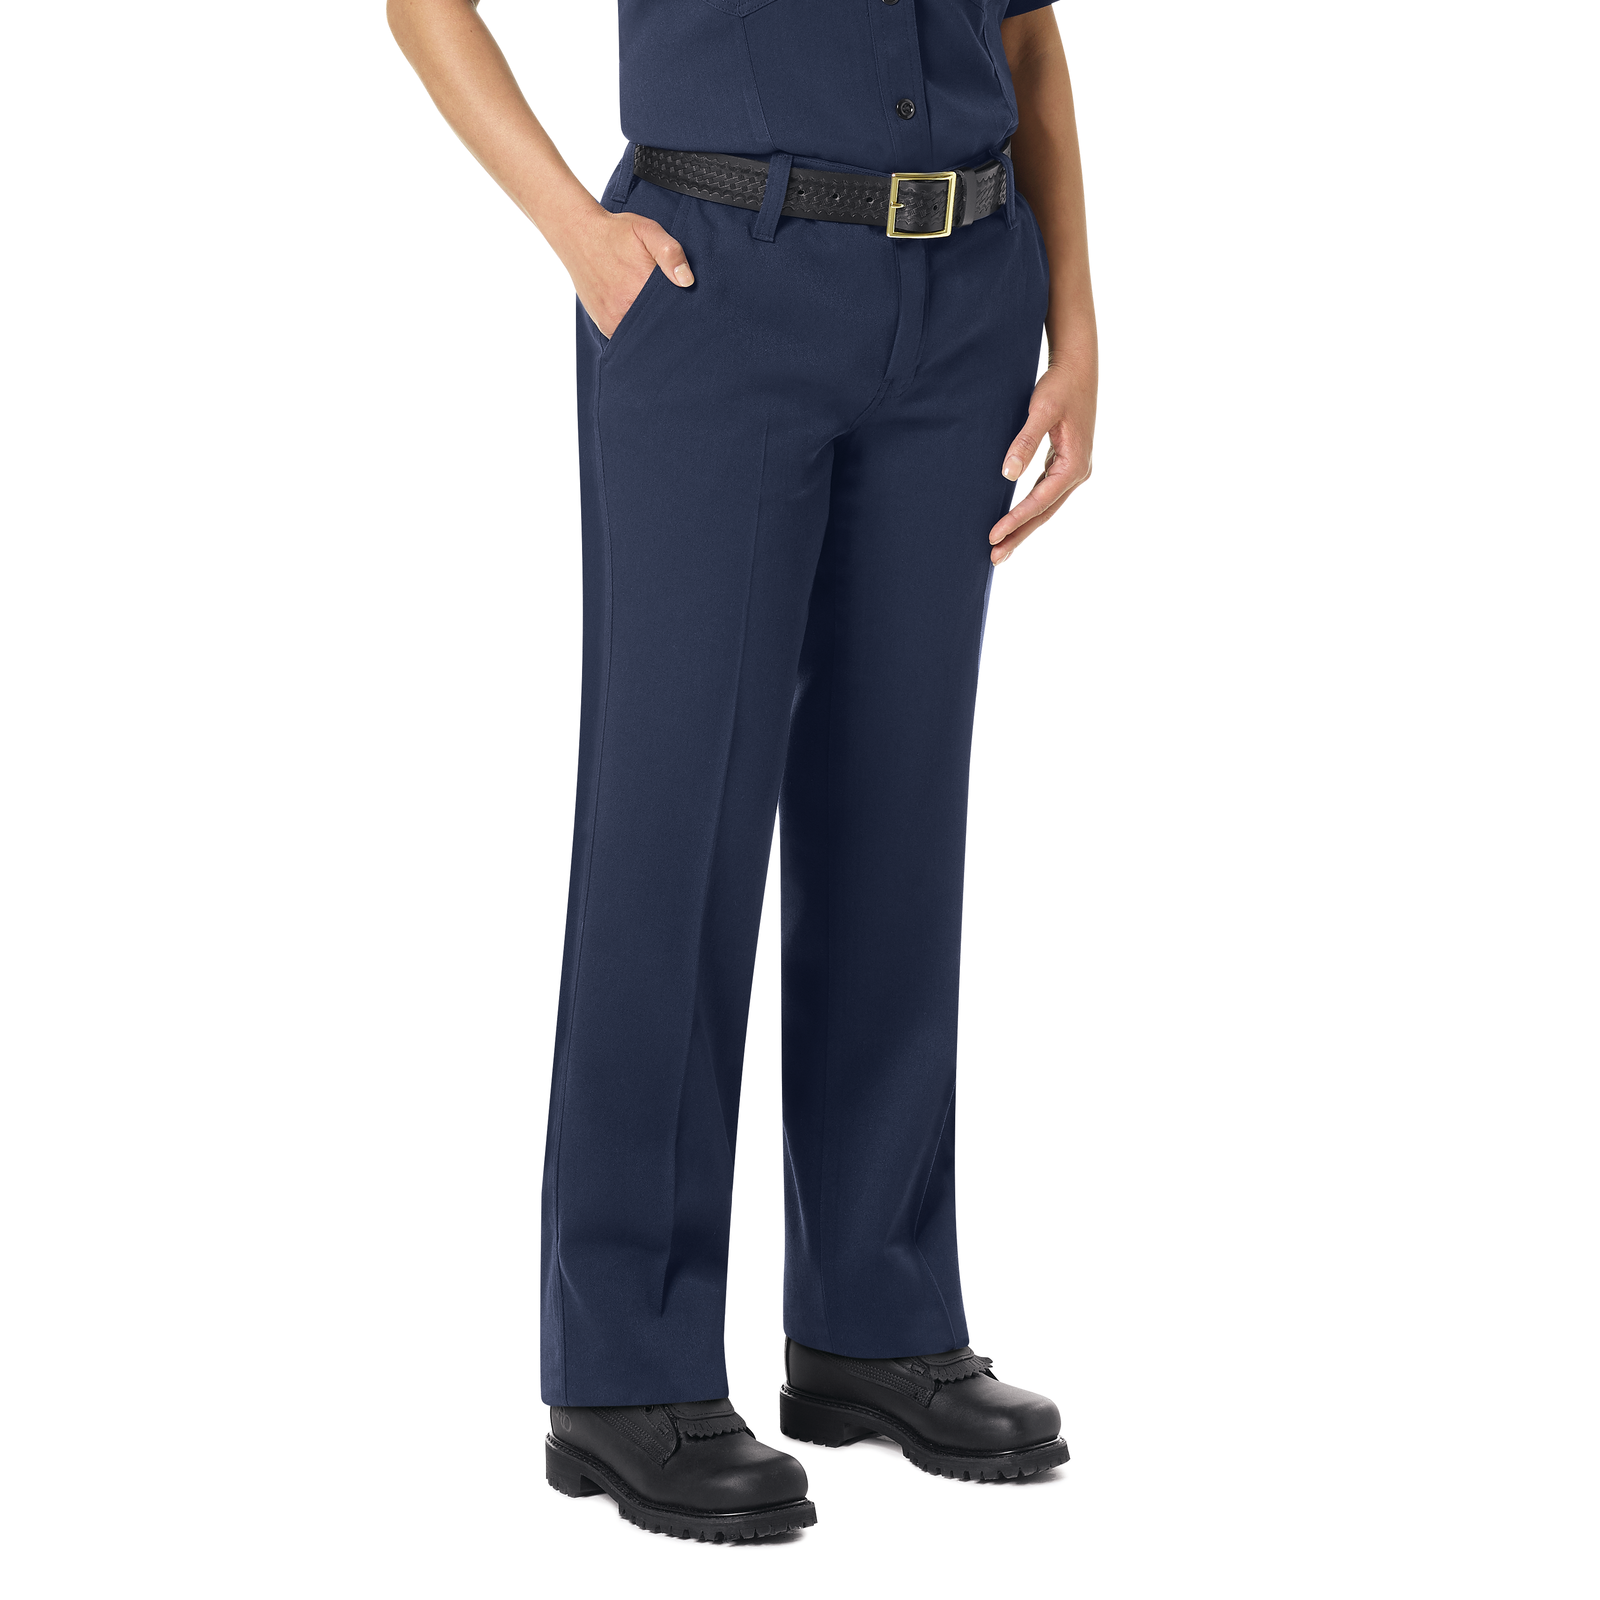 Workrite WomenS Station No. 73 Cargo Pant (FP45) | The Fire Center | Fuego Fire Center | Store | FIREFIGHTER GEAR | FREE SHIPPING | Introducing our new Station No. 73 Collection. Contemporary flame-resistant station wear built with functionality, comfort and NFPA® 1975 compliance in mind. Contoured waistband helps you move naturally without causing discomfort or drooping.